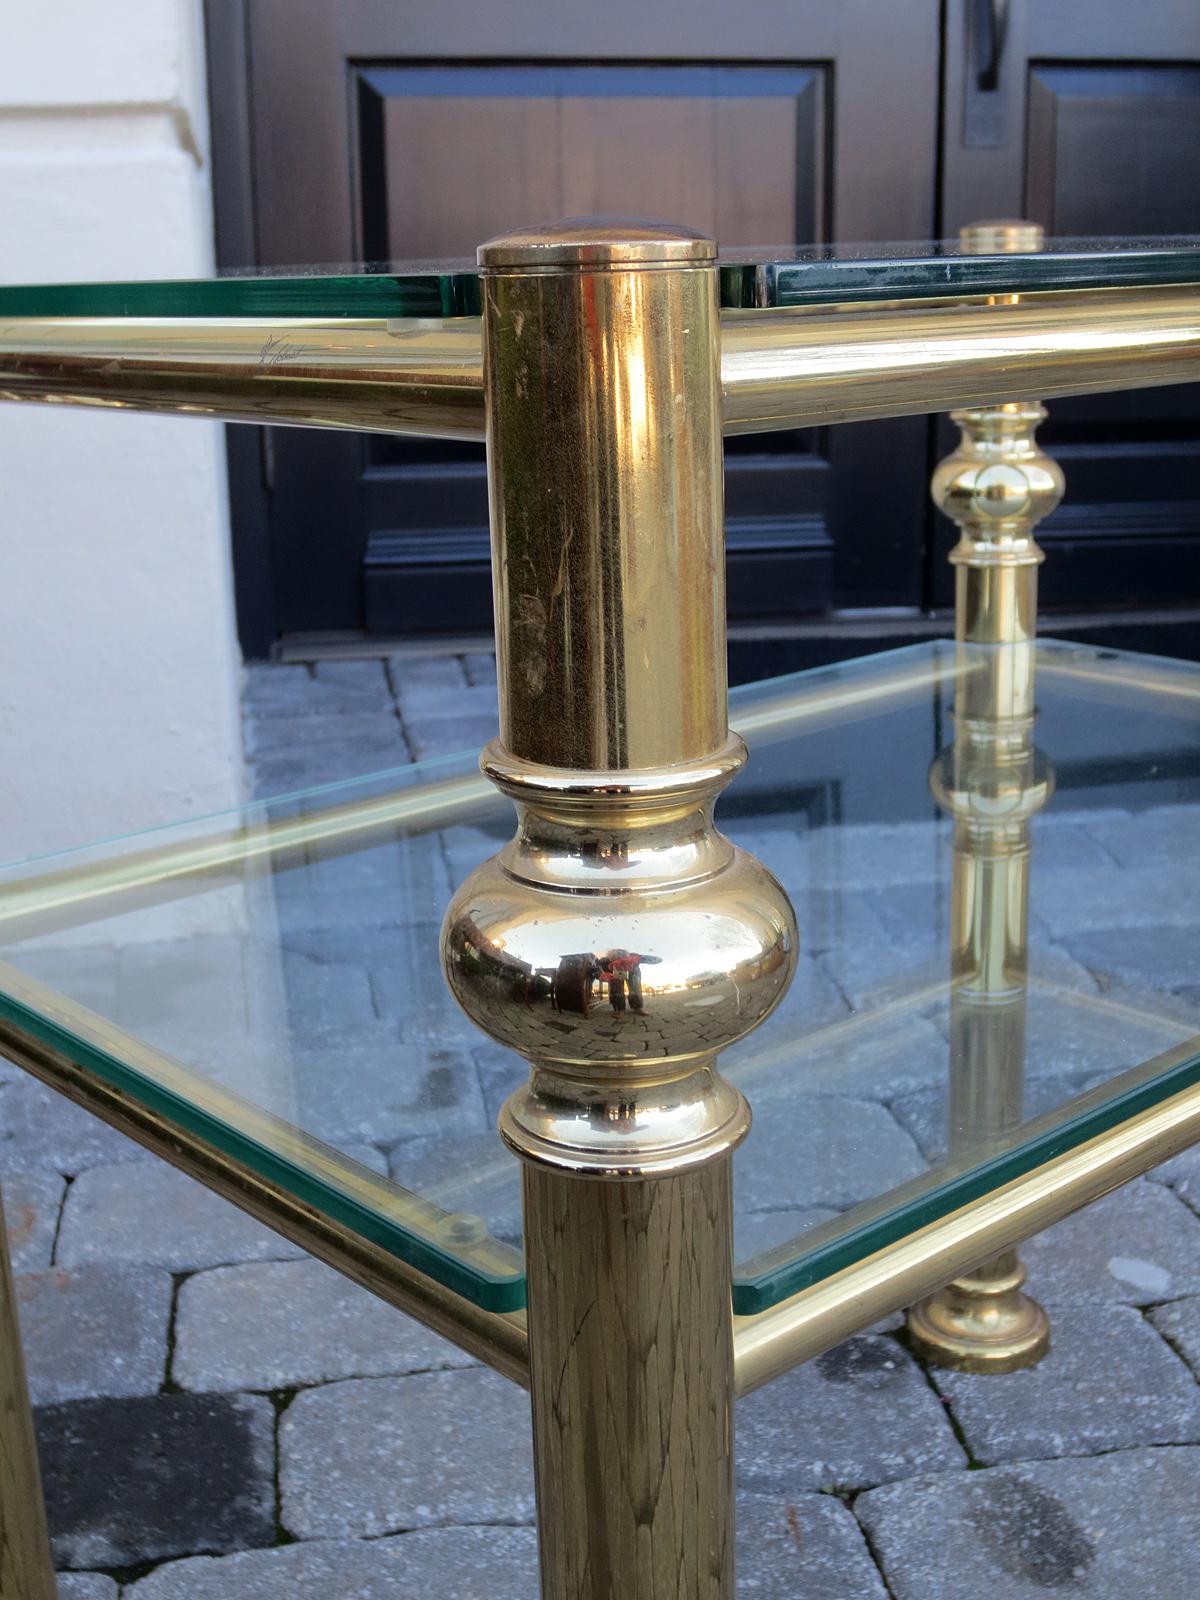 Mid-20th century brass and glass table by Donghia.